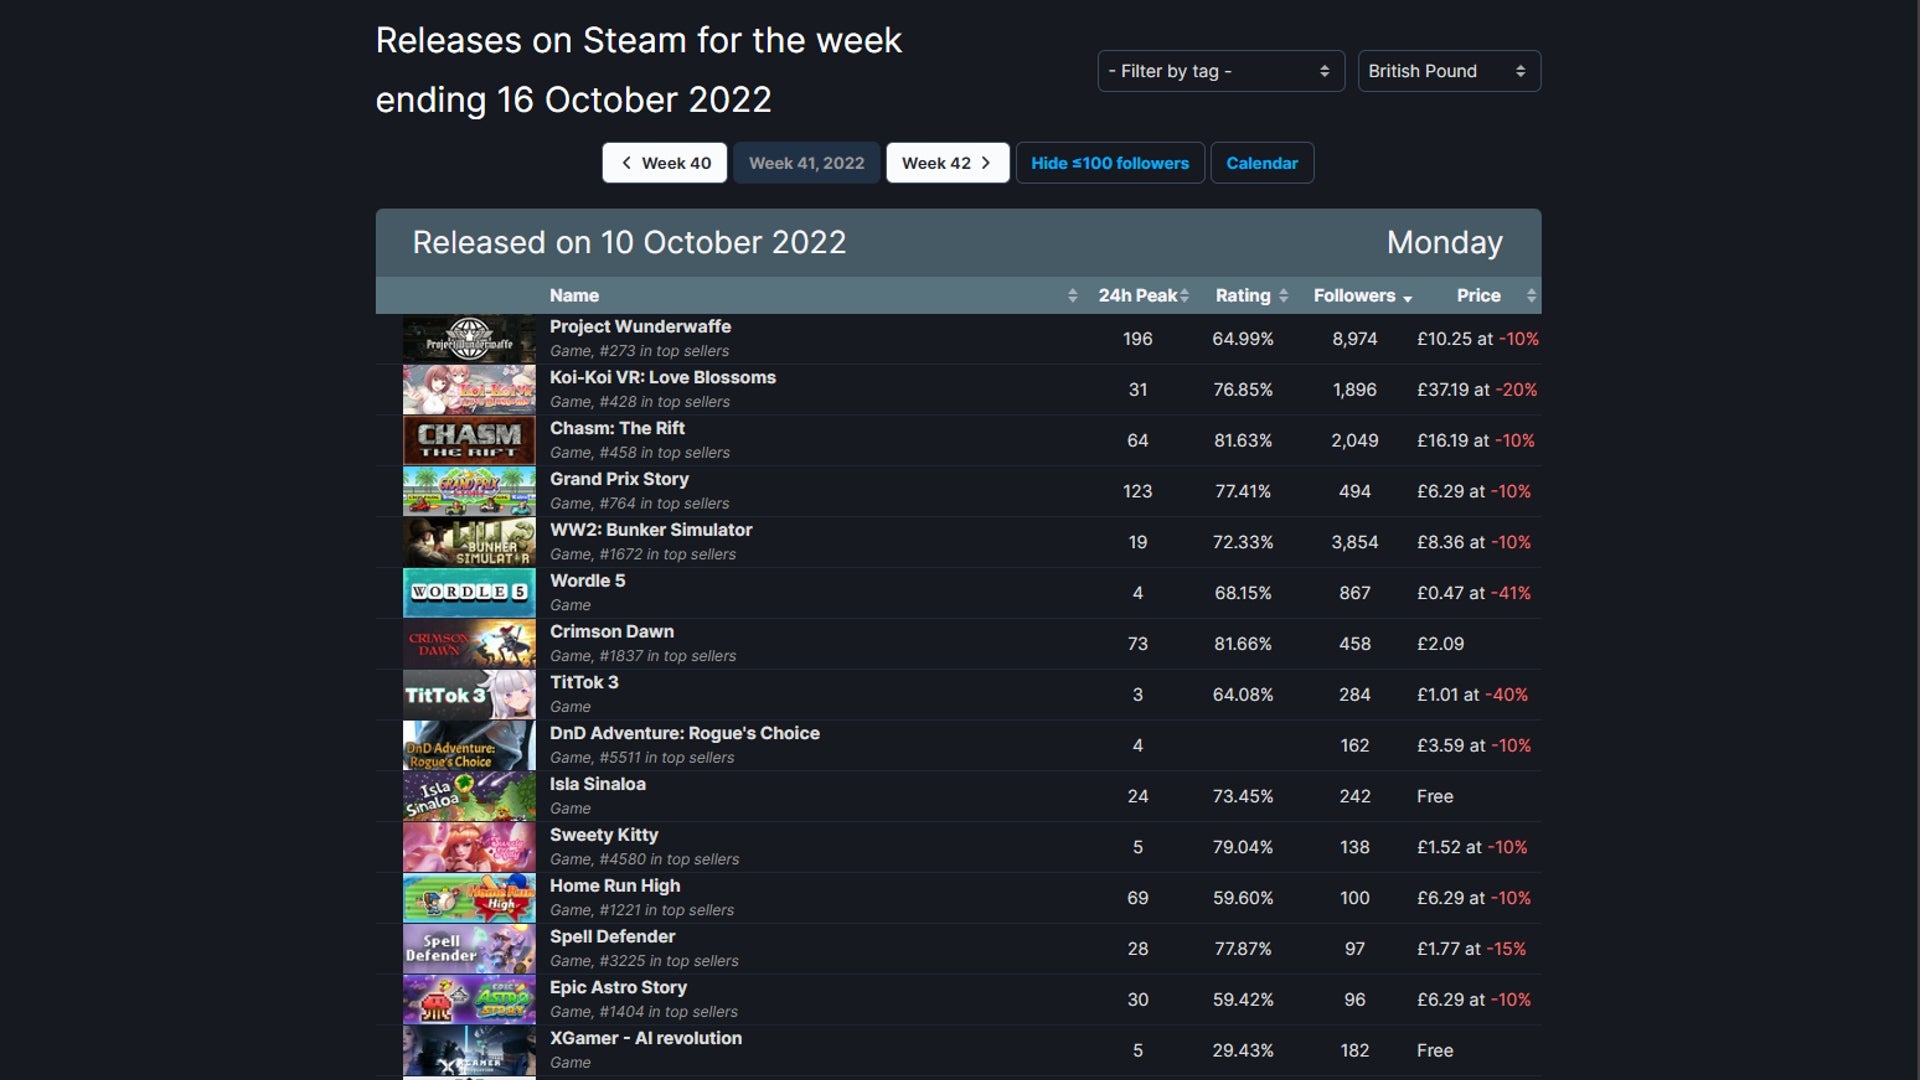 SteamDB has created a new weekly calendar navigator showing which games are coming out on Steam day-by-day.